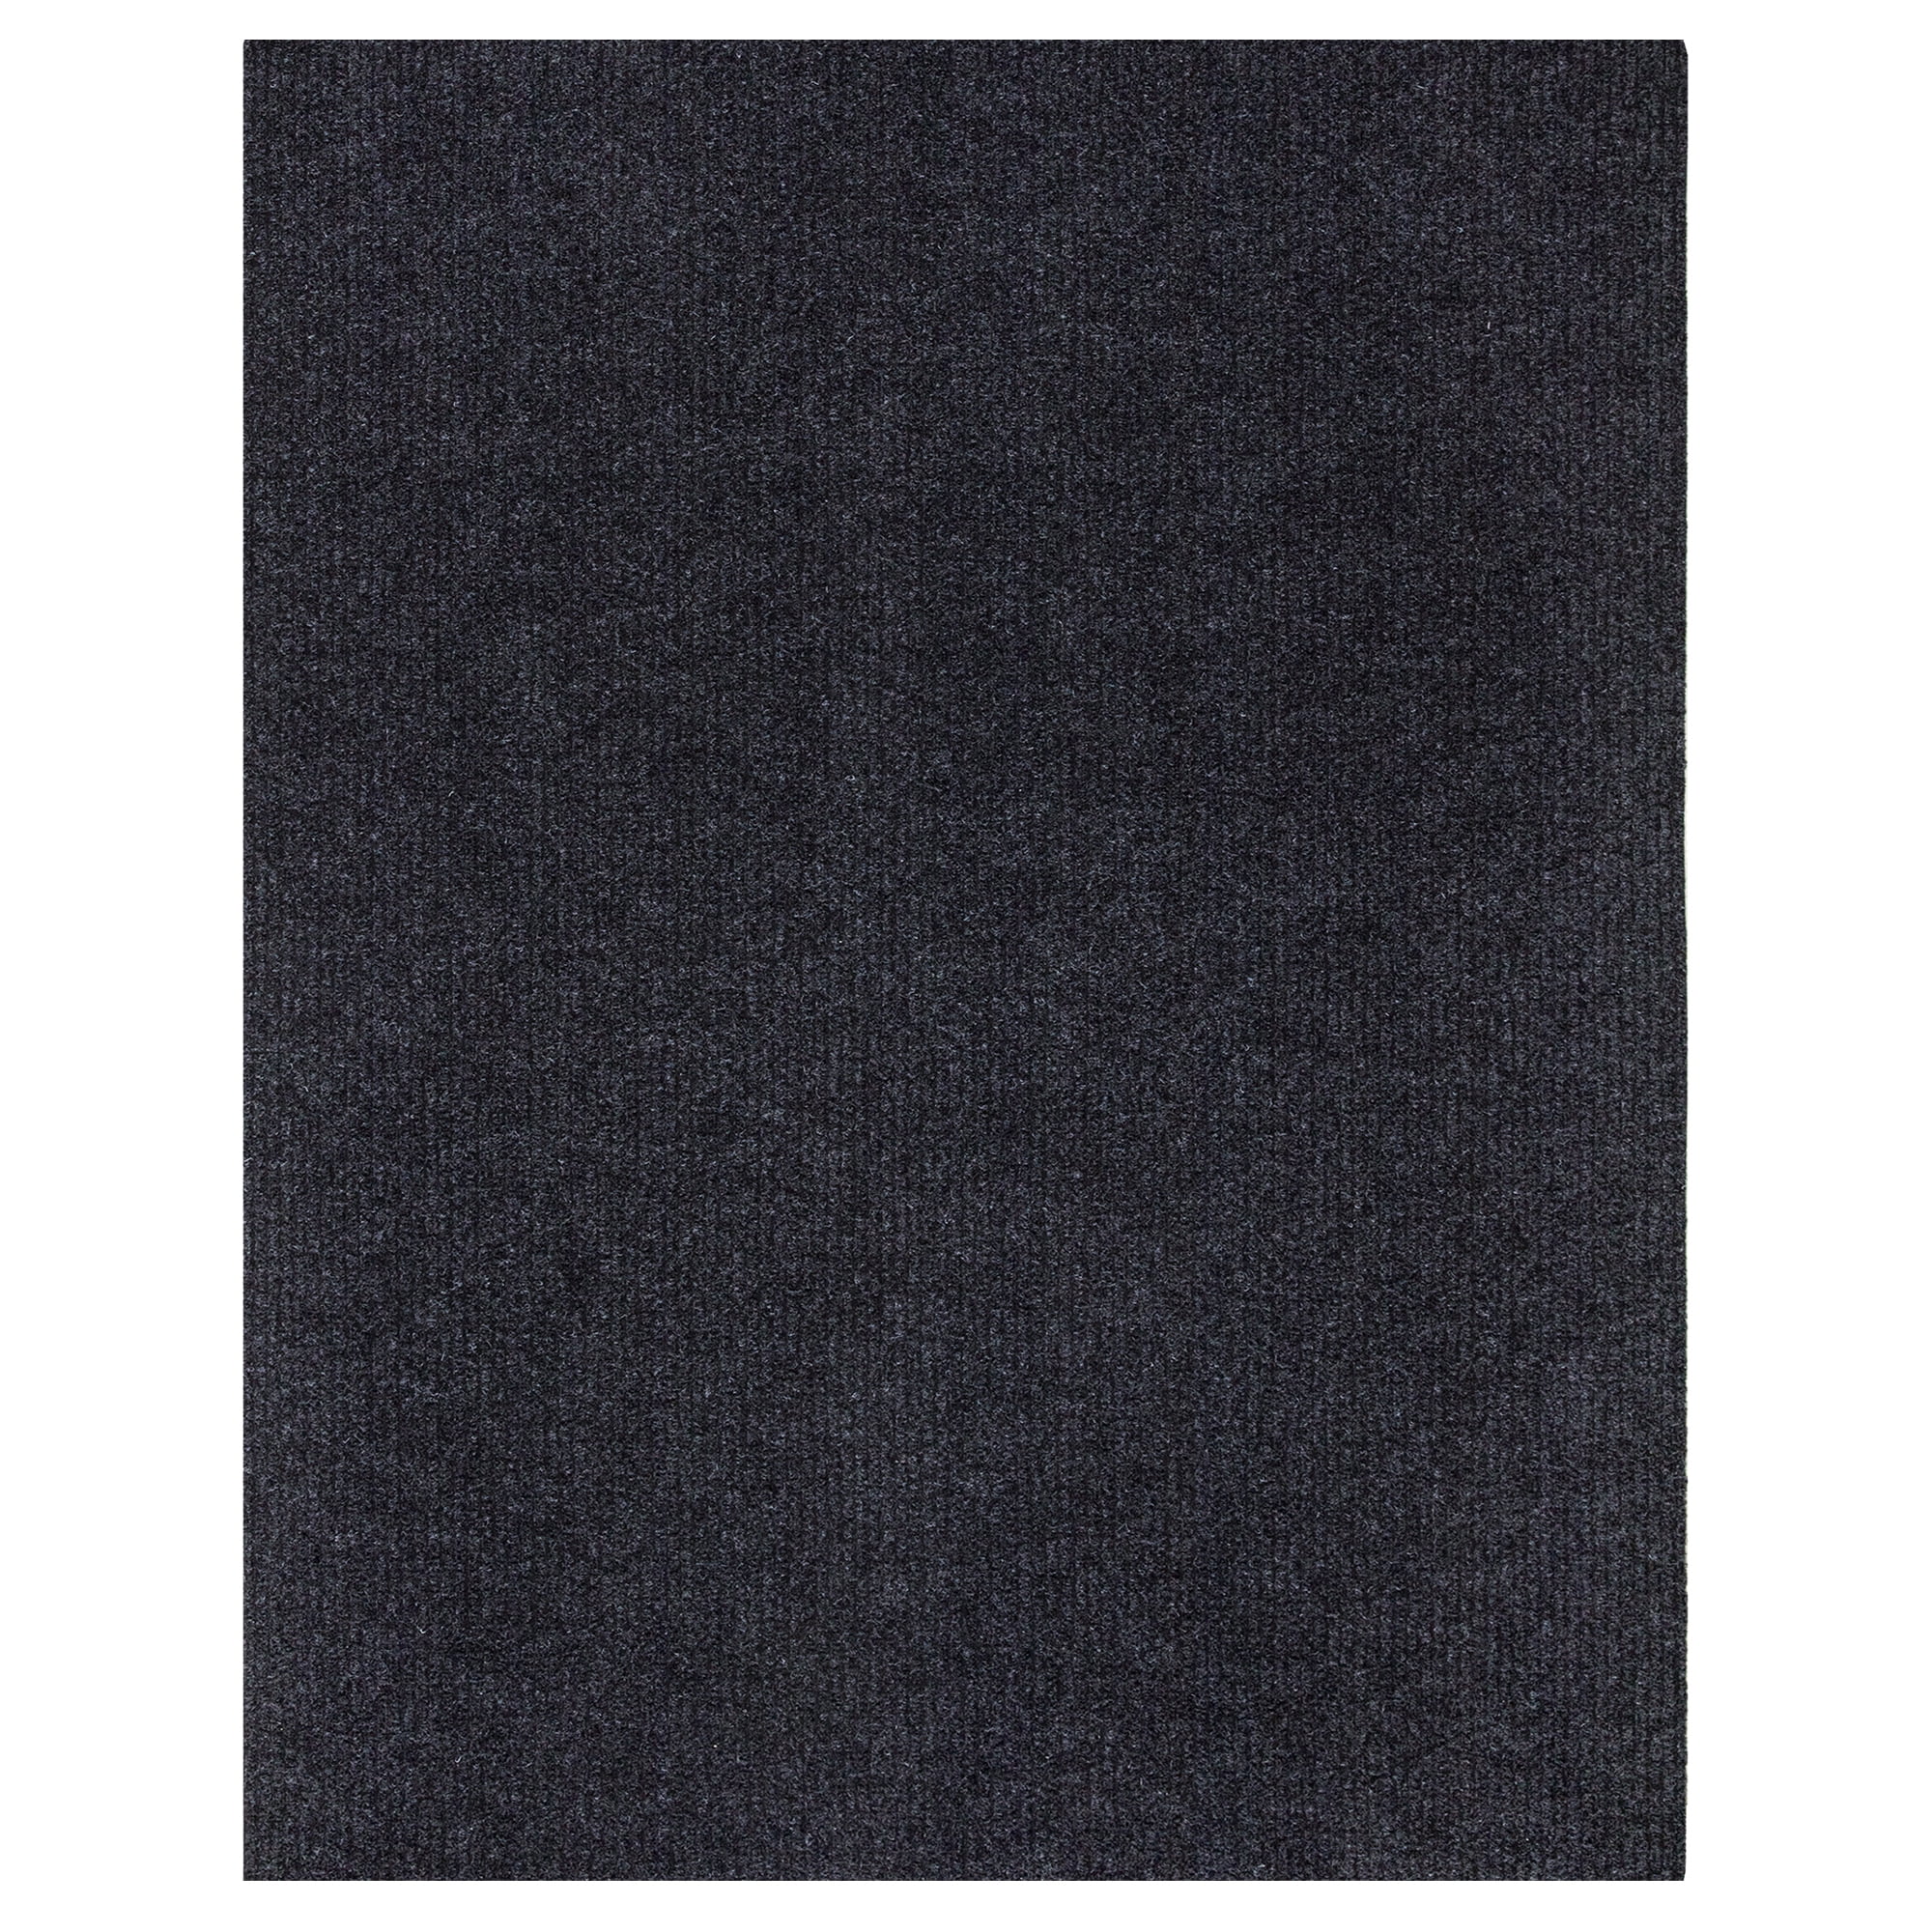 Ottomanson Lifesaver Collection Black 5 ft. x 7 ft. Utility Ribbed Solid Indoor/Outdoor Area Rug